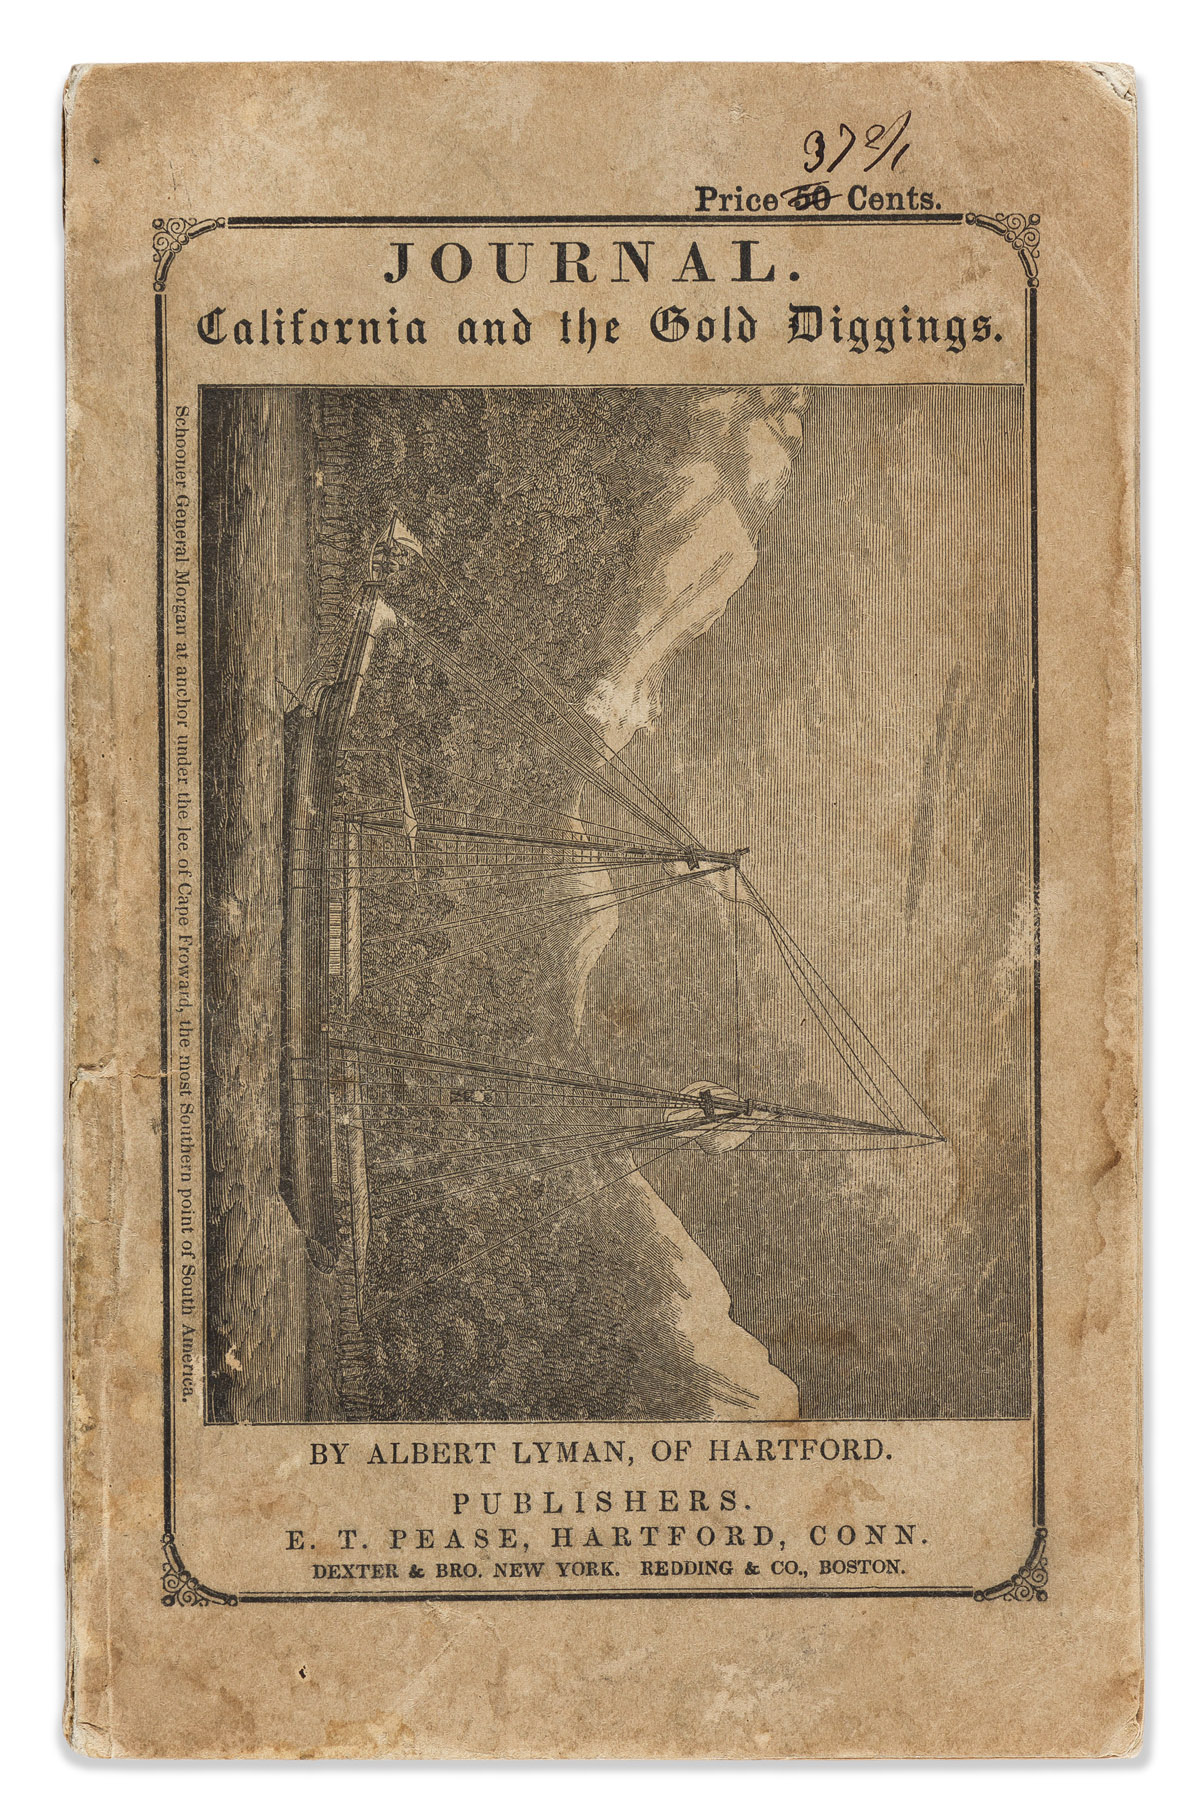 (CALIFORNIA.) Albert Lyman. Journal of a Voyage to California, and Life in the Gold Diggings.